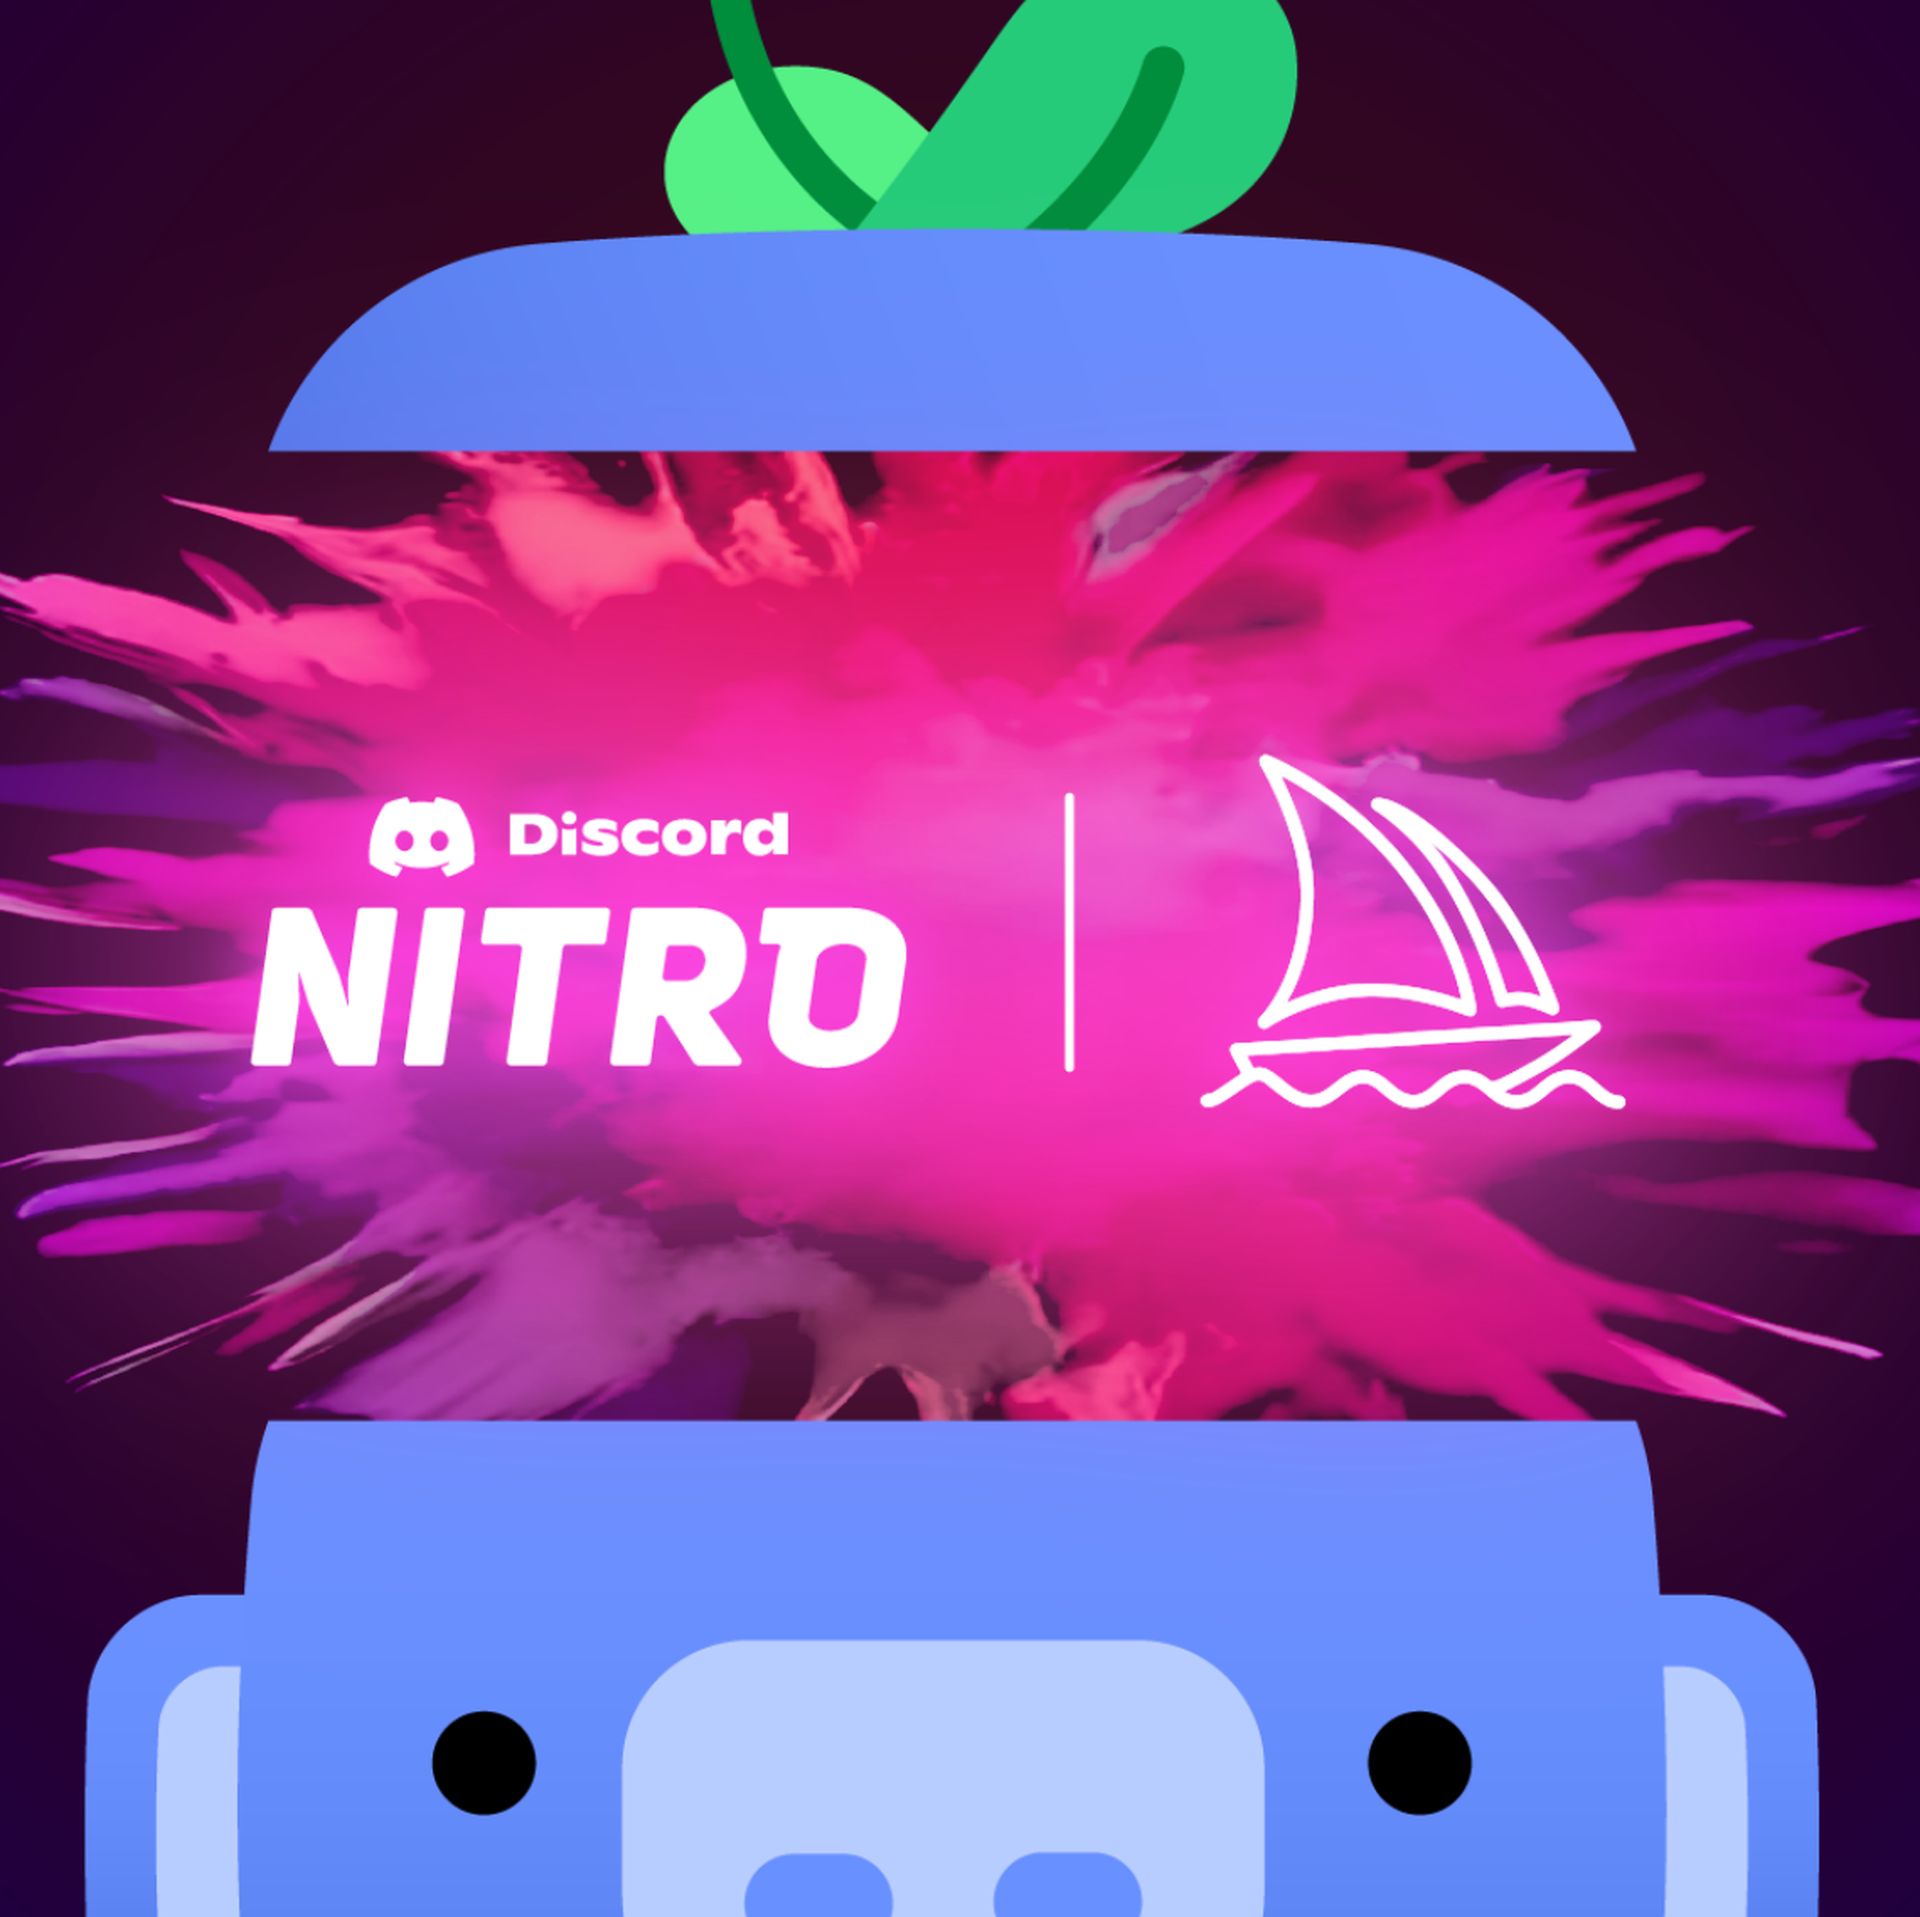 How to get the Discord Nitro x Midjourney free trial: Claiming and redeeming Midjourney code explained. Keep reading and explore now!